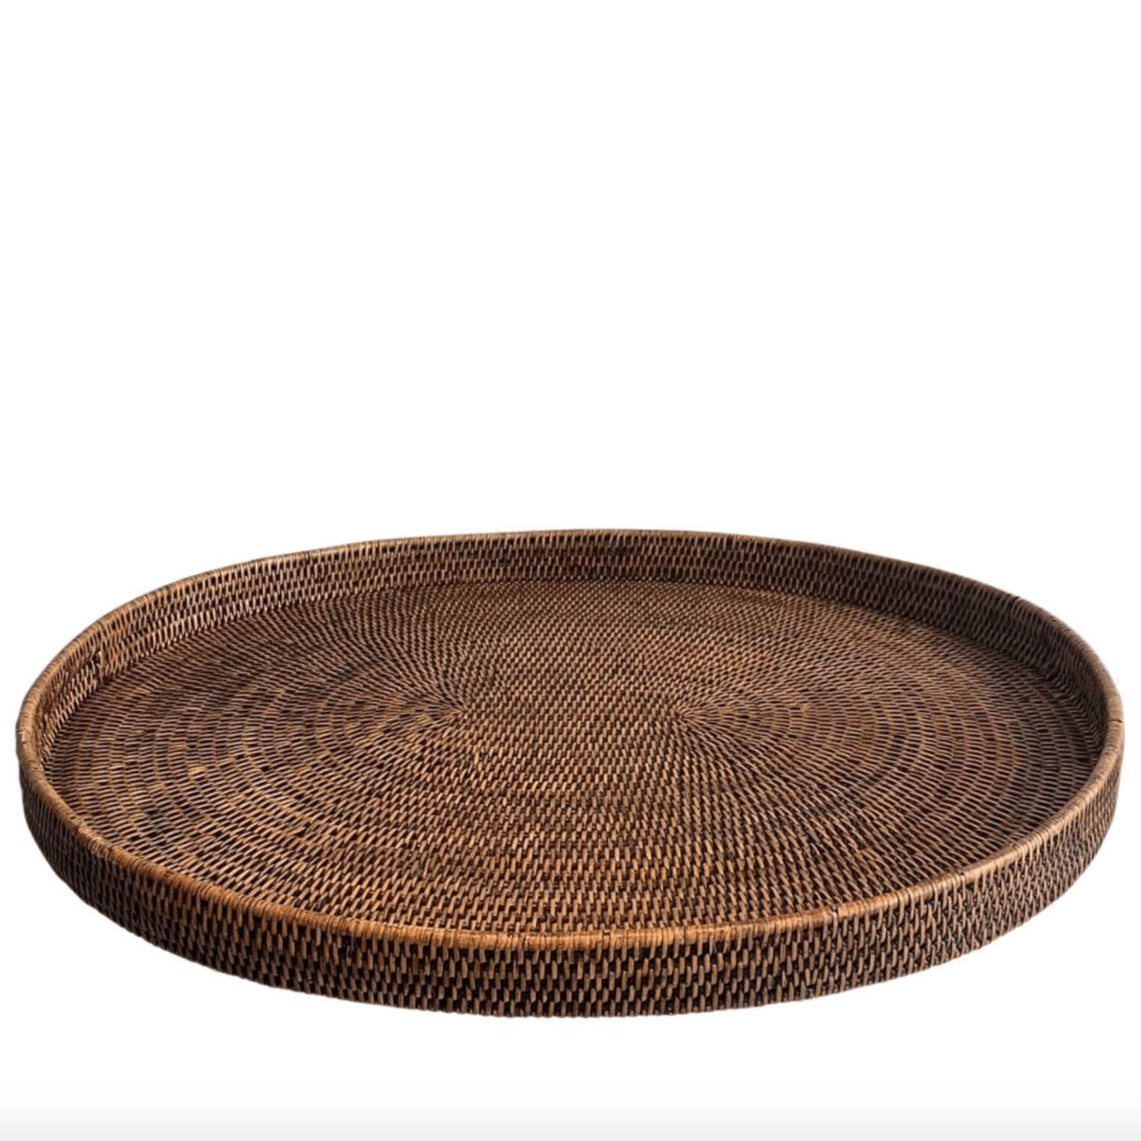 A brown rattan oval tray.